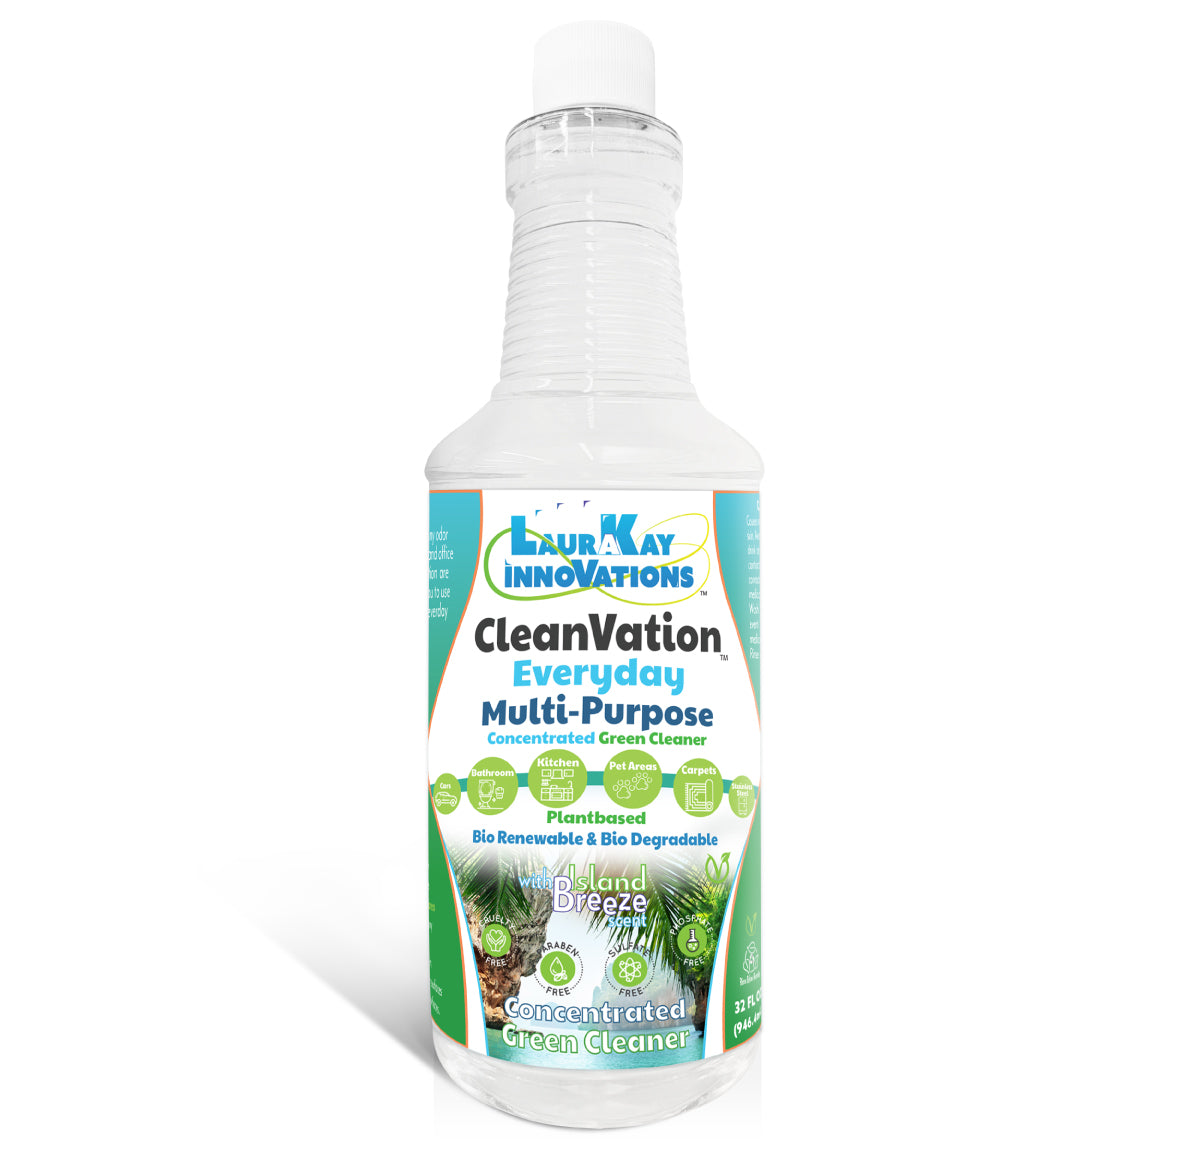 OxyVation™ 3 in 1 Germ & Virus Fighting, Stain and Odor, and Multi